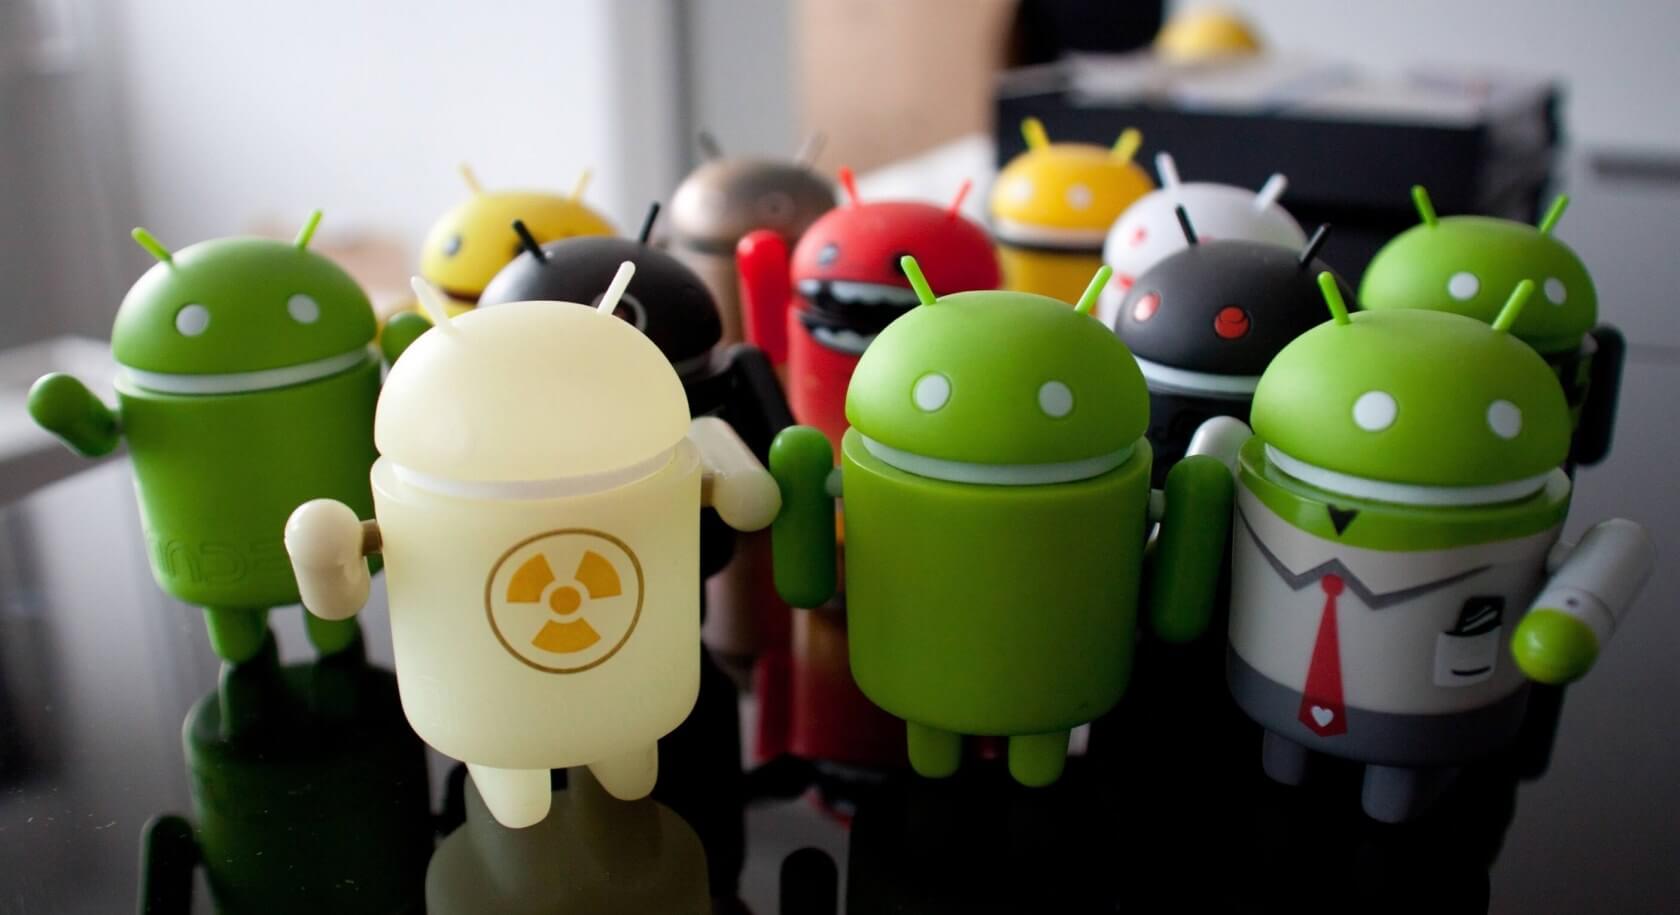 Updated Android contract reportedly requires phone makers to roll out regular security updates